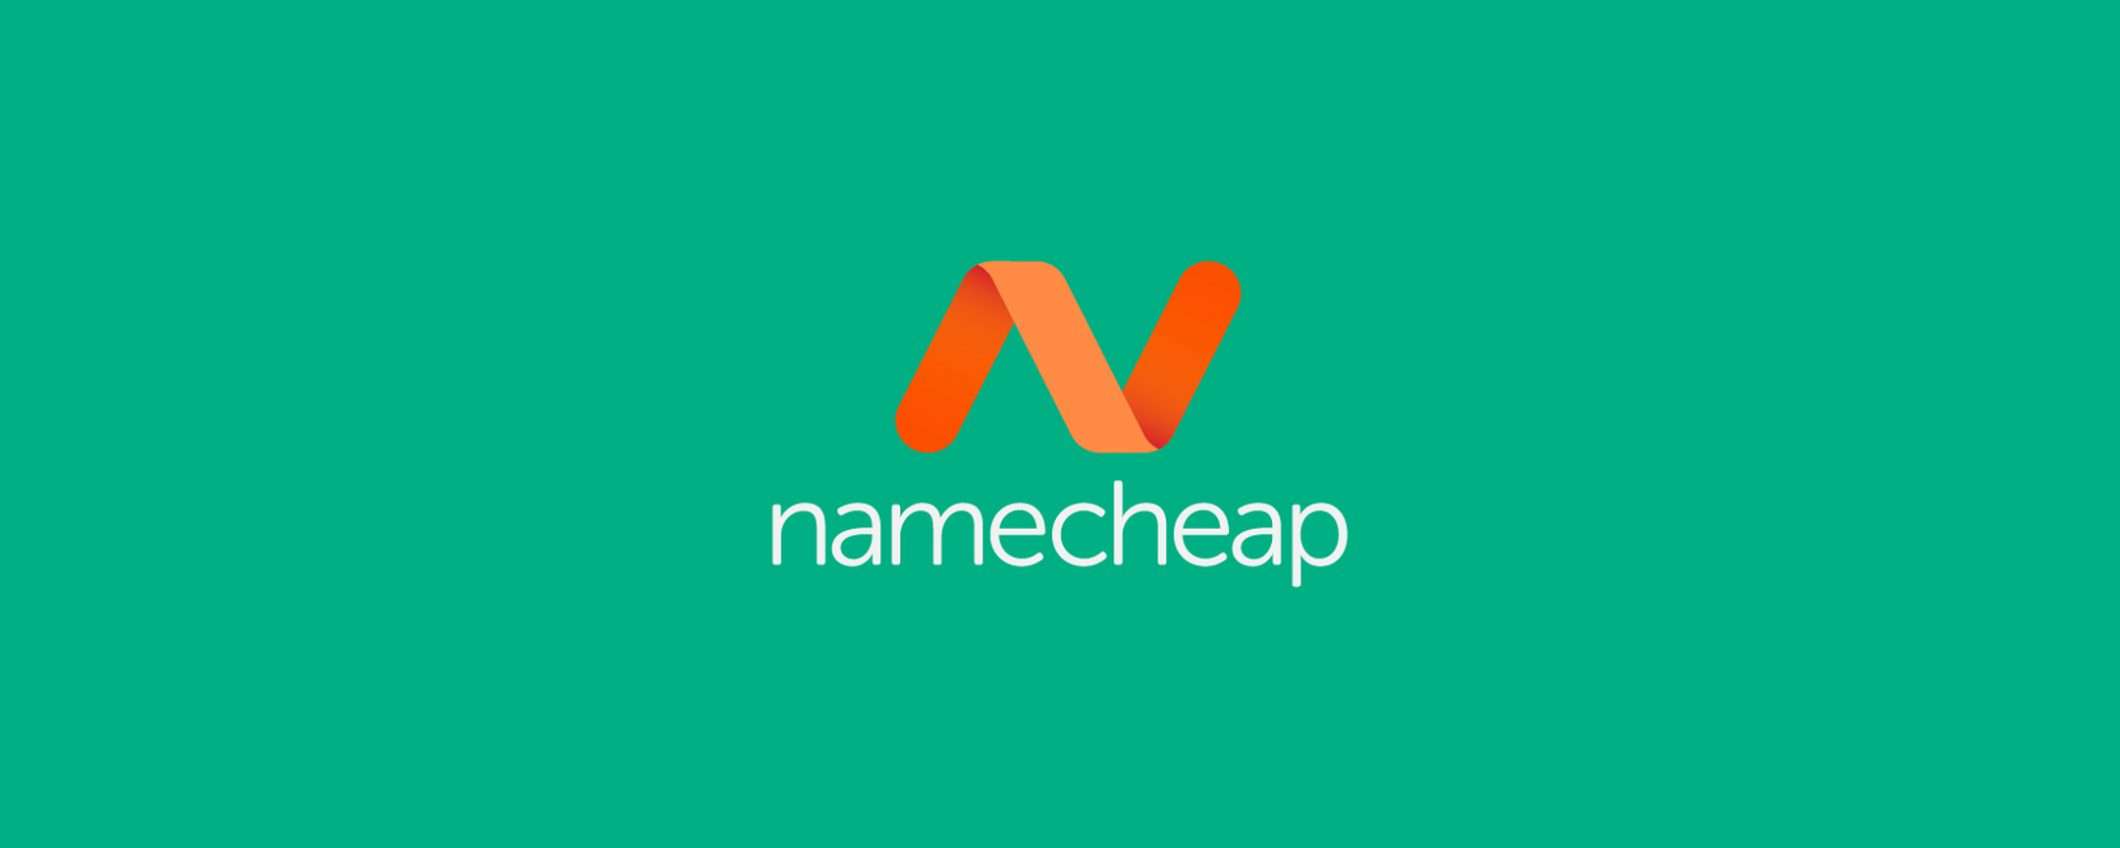 Namecheap hosting: pacchetto completo all'80% in meno